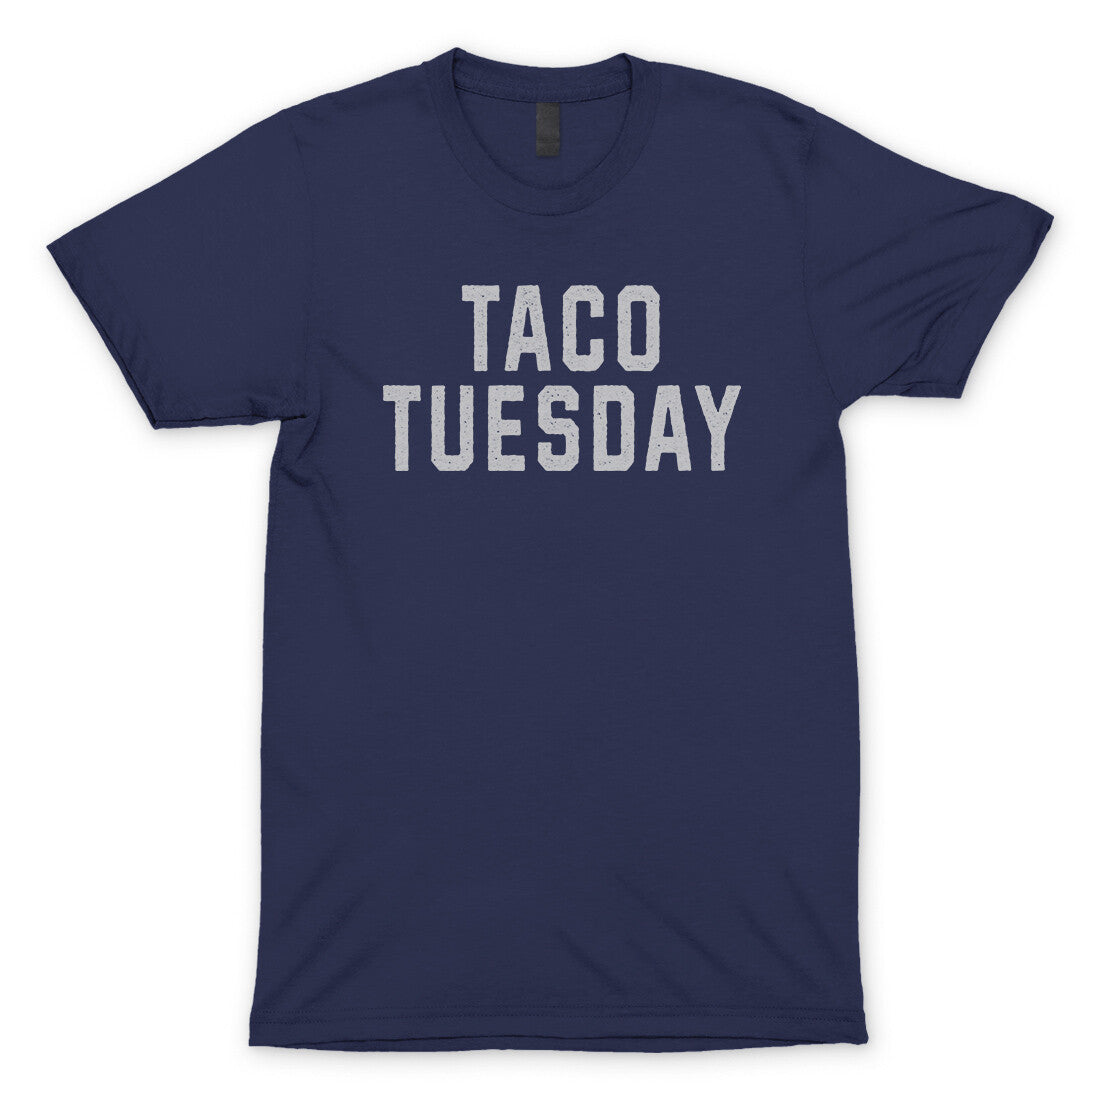 Taco Tuesday in Navy Color